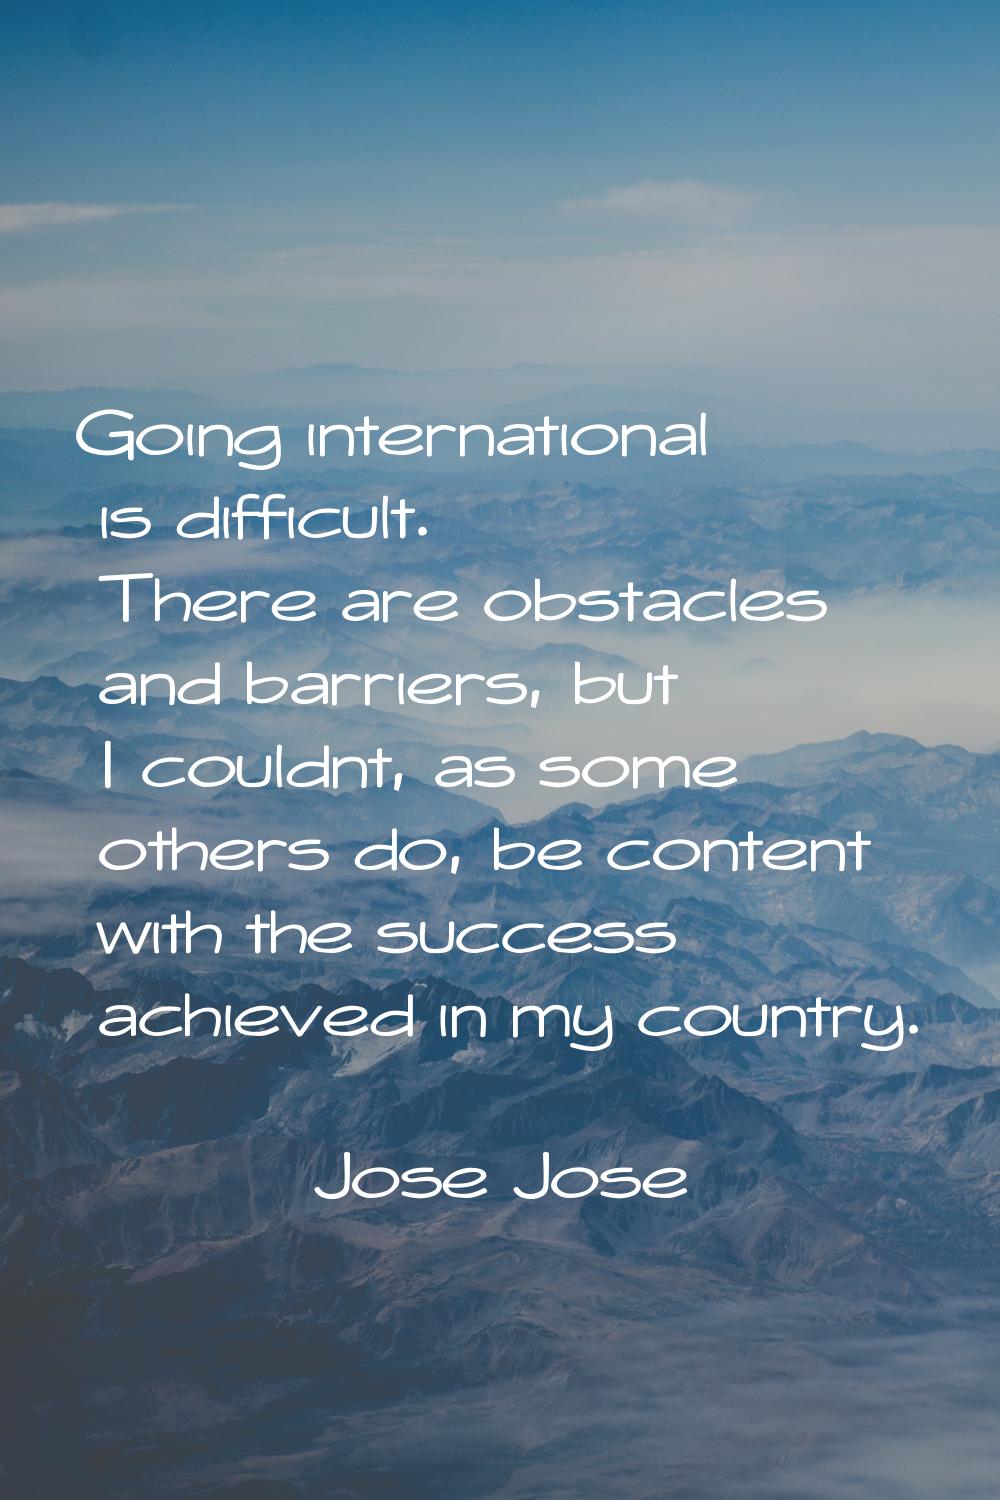 Going international is difficult. There are obstacles and barriers, but I couldnt, as some others d